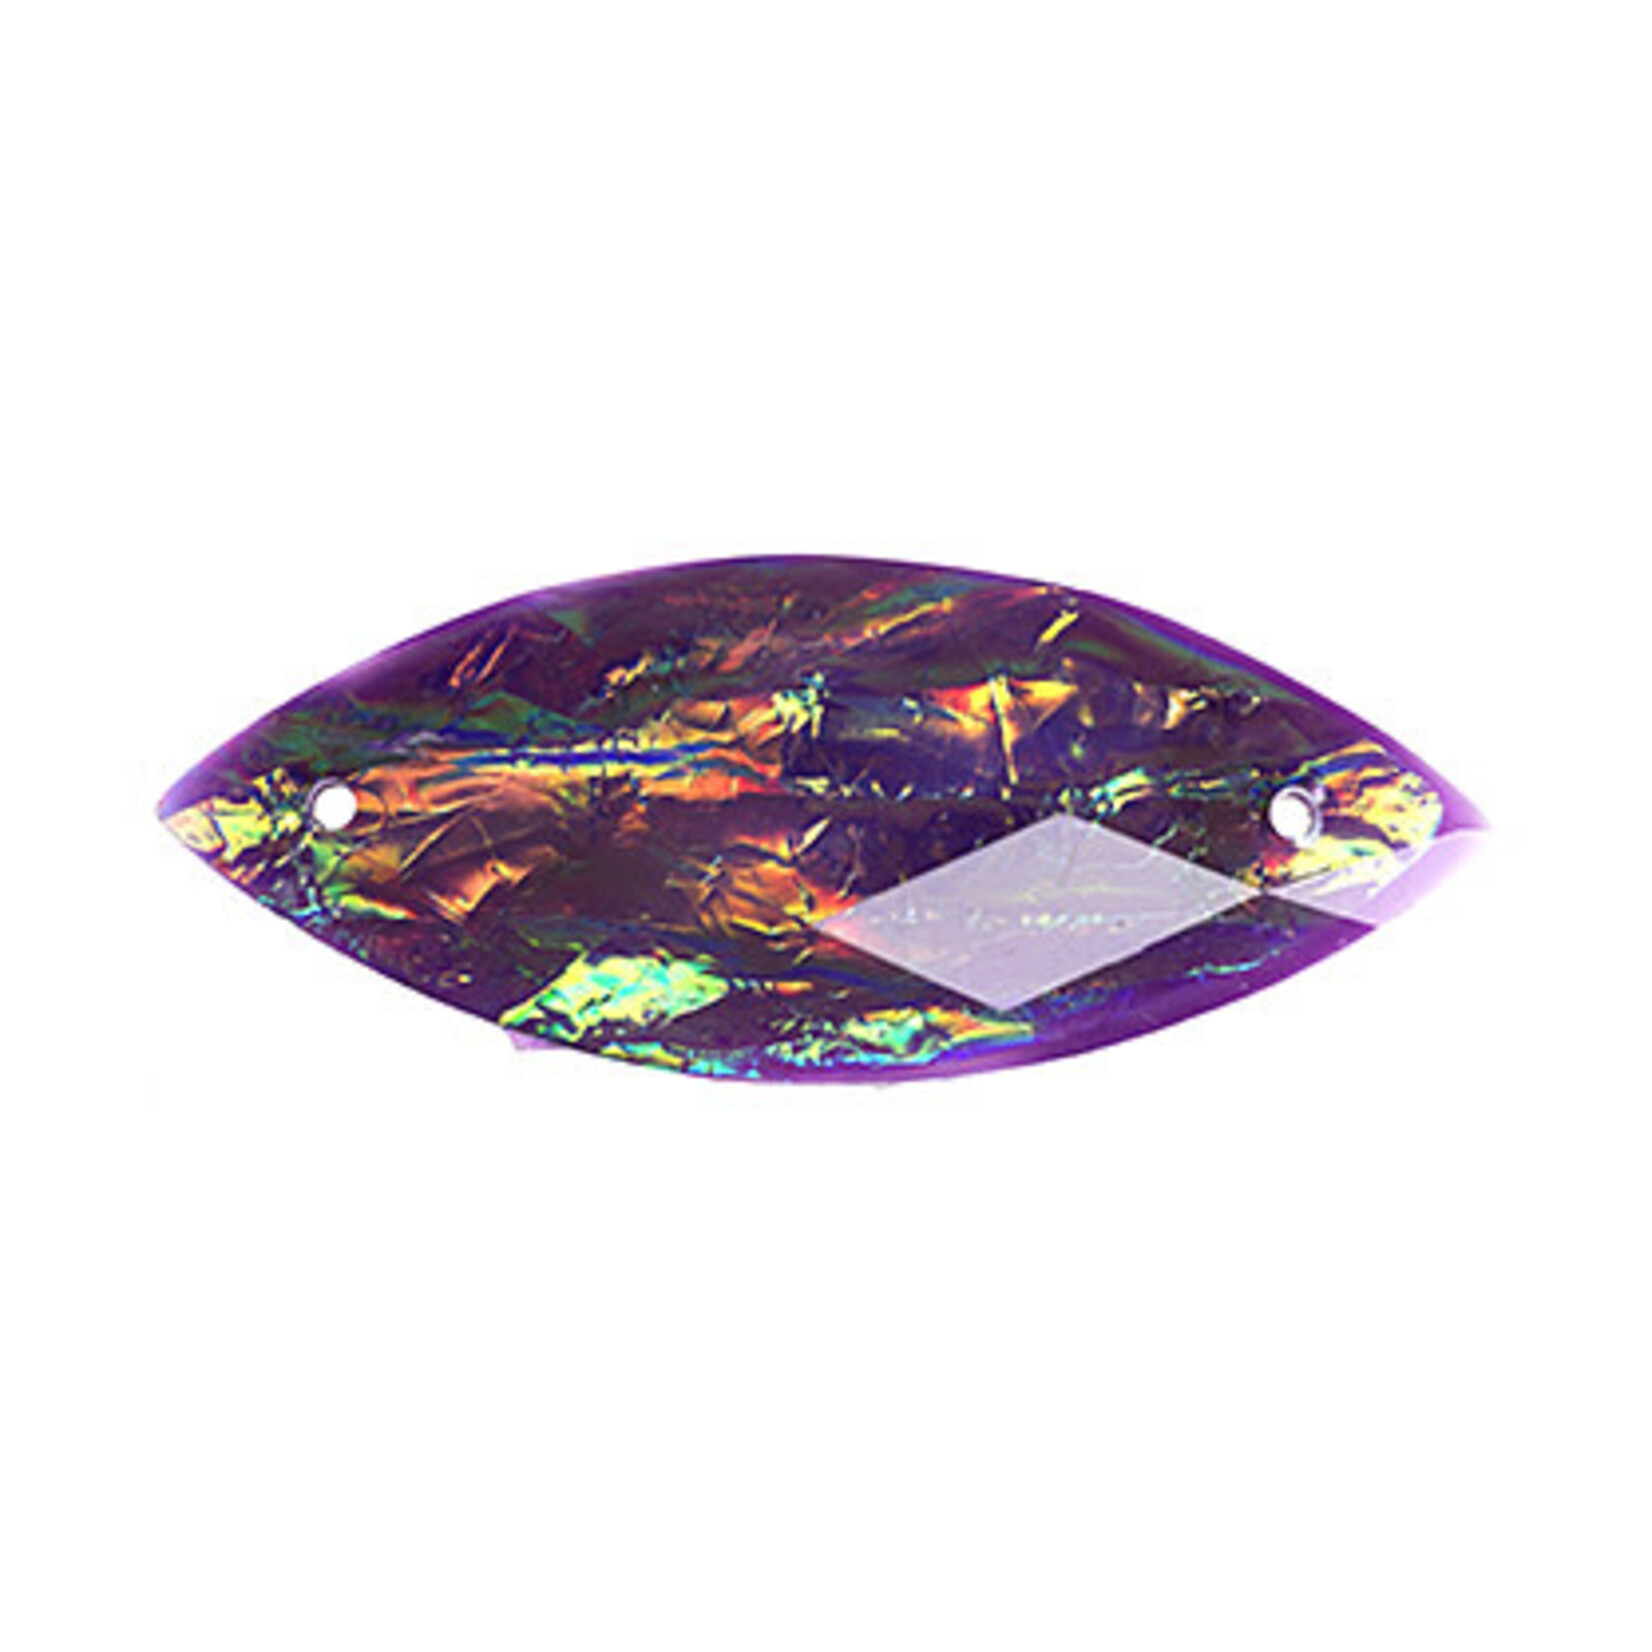 Dichroic Style Sew-On Stone 12 x 30 mm Navette (10 Pieces)